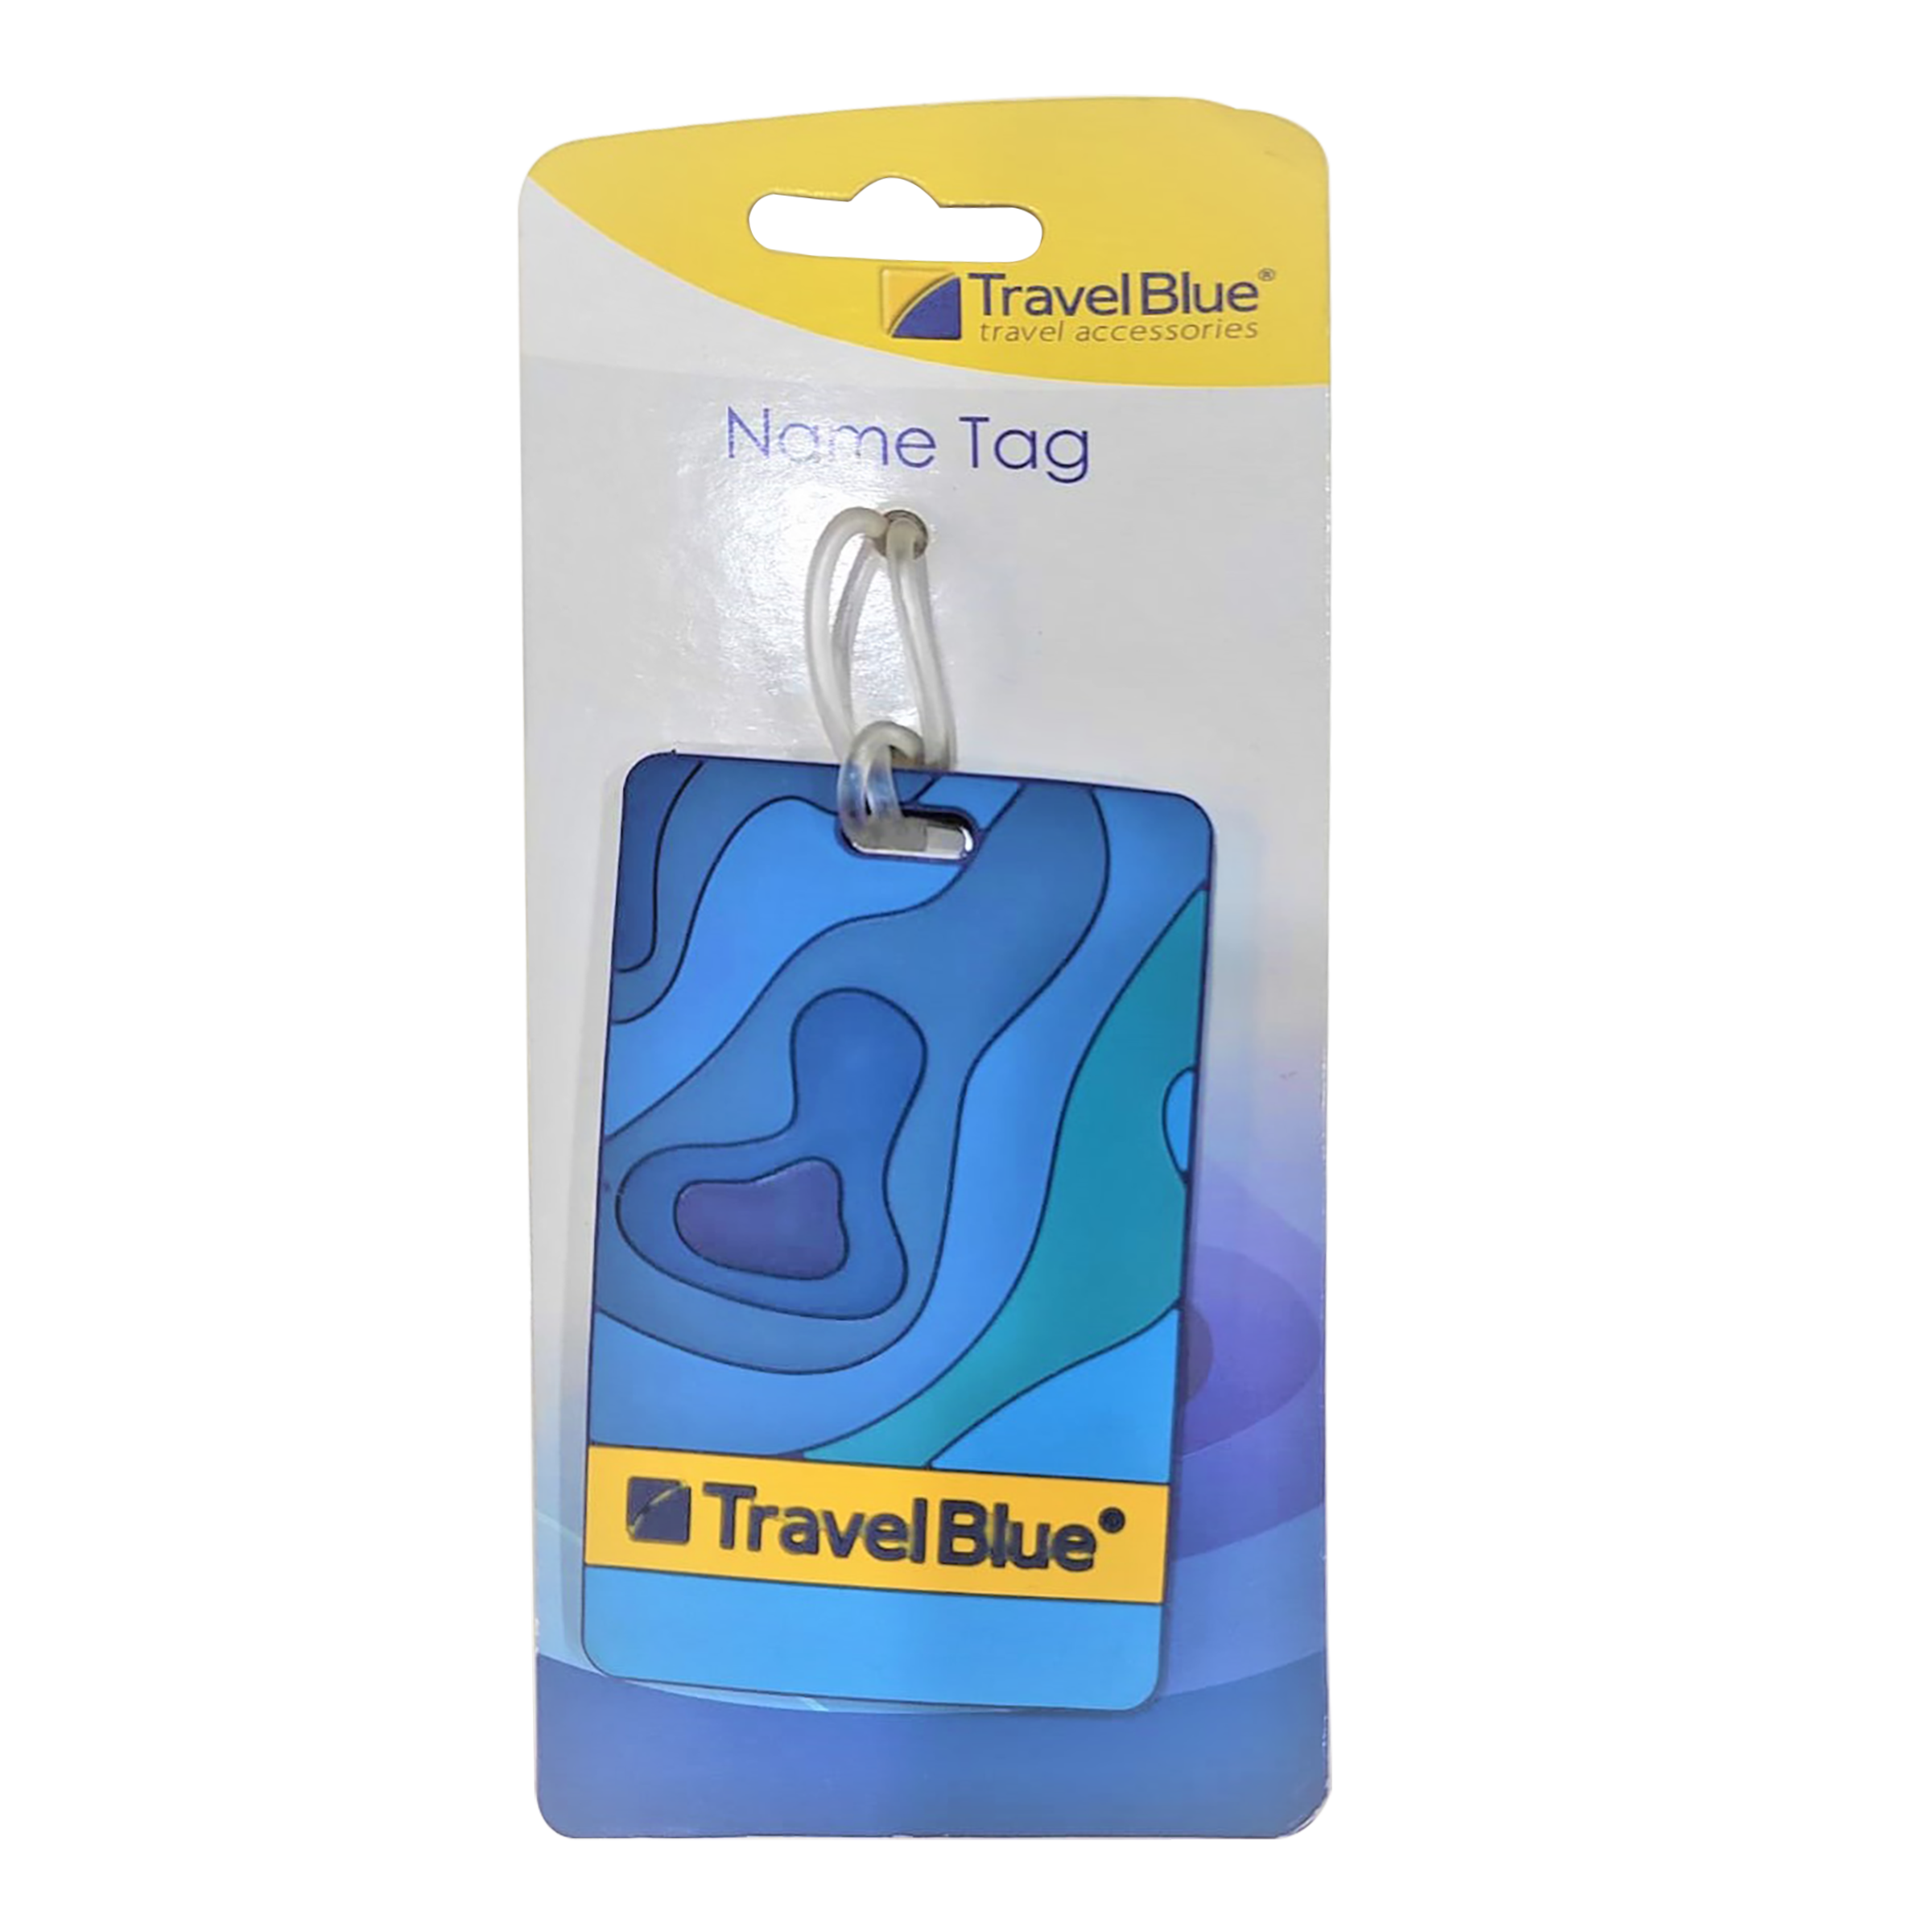 Buy Travel Blue Map Luggage Tags (Personal Details Concealed